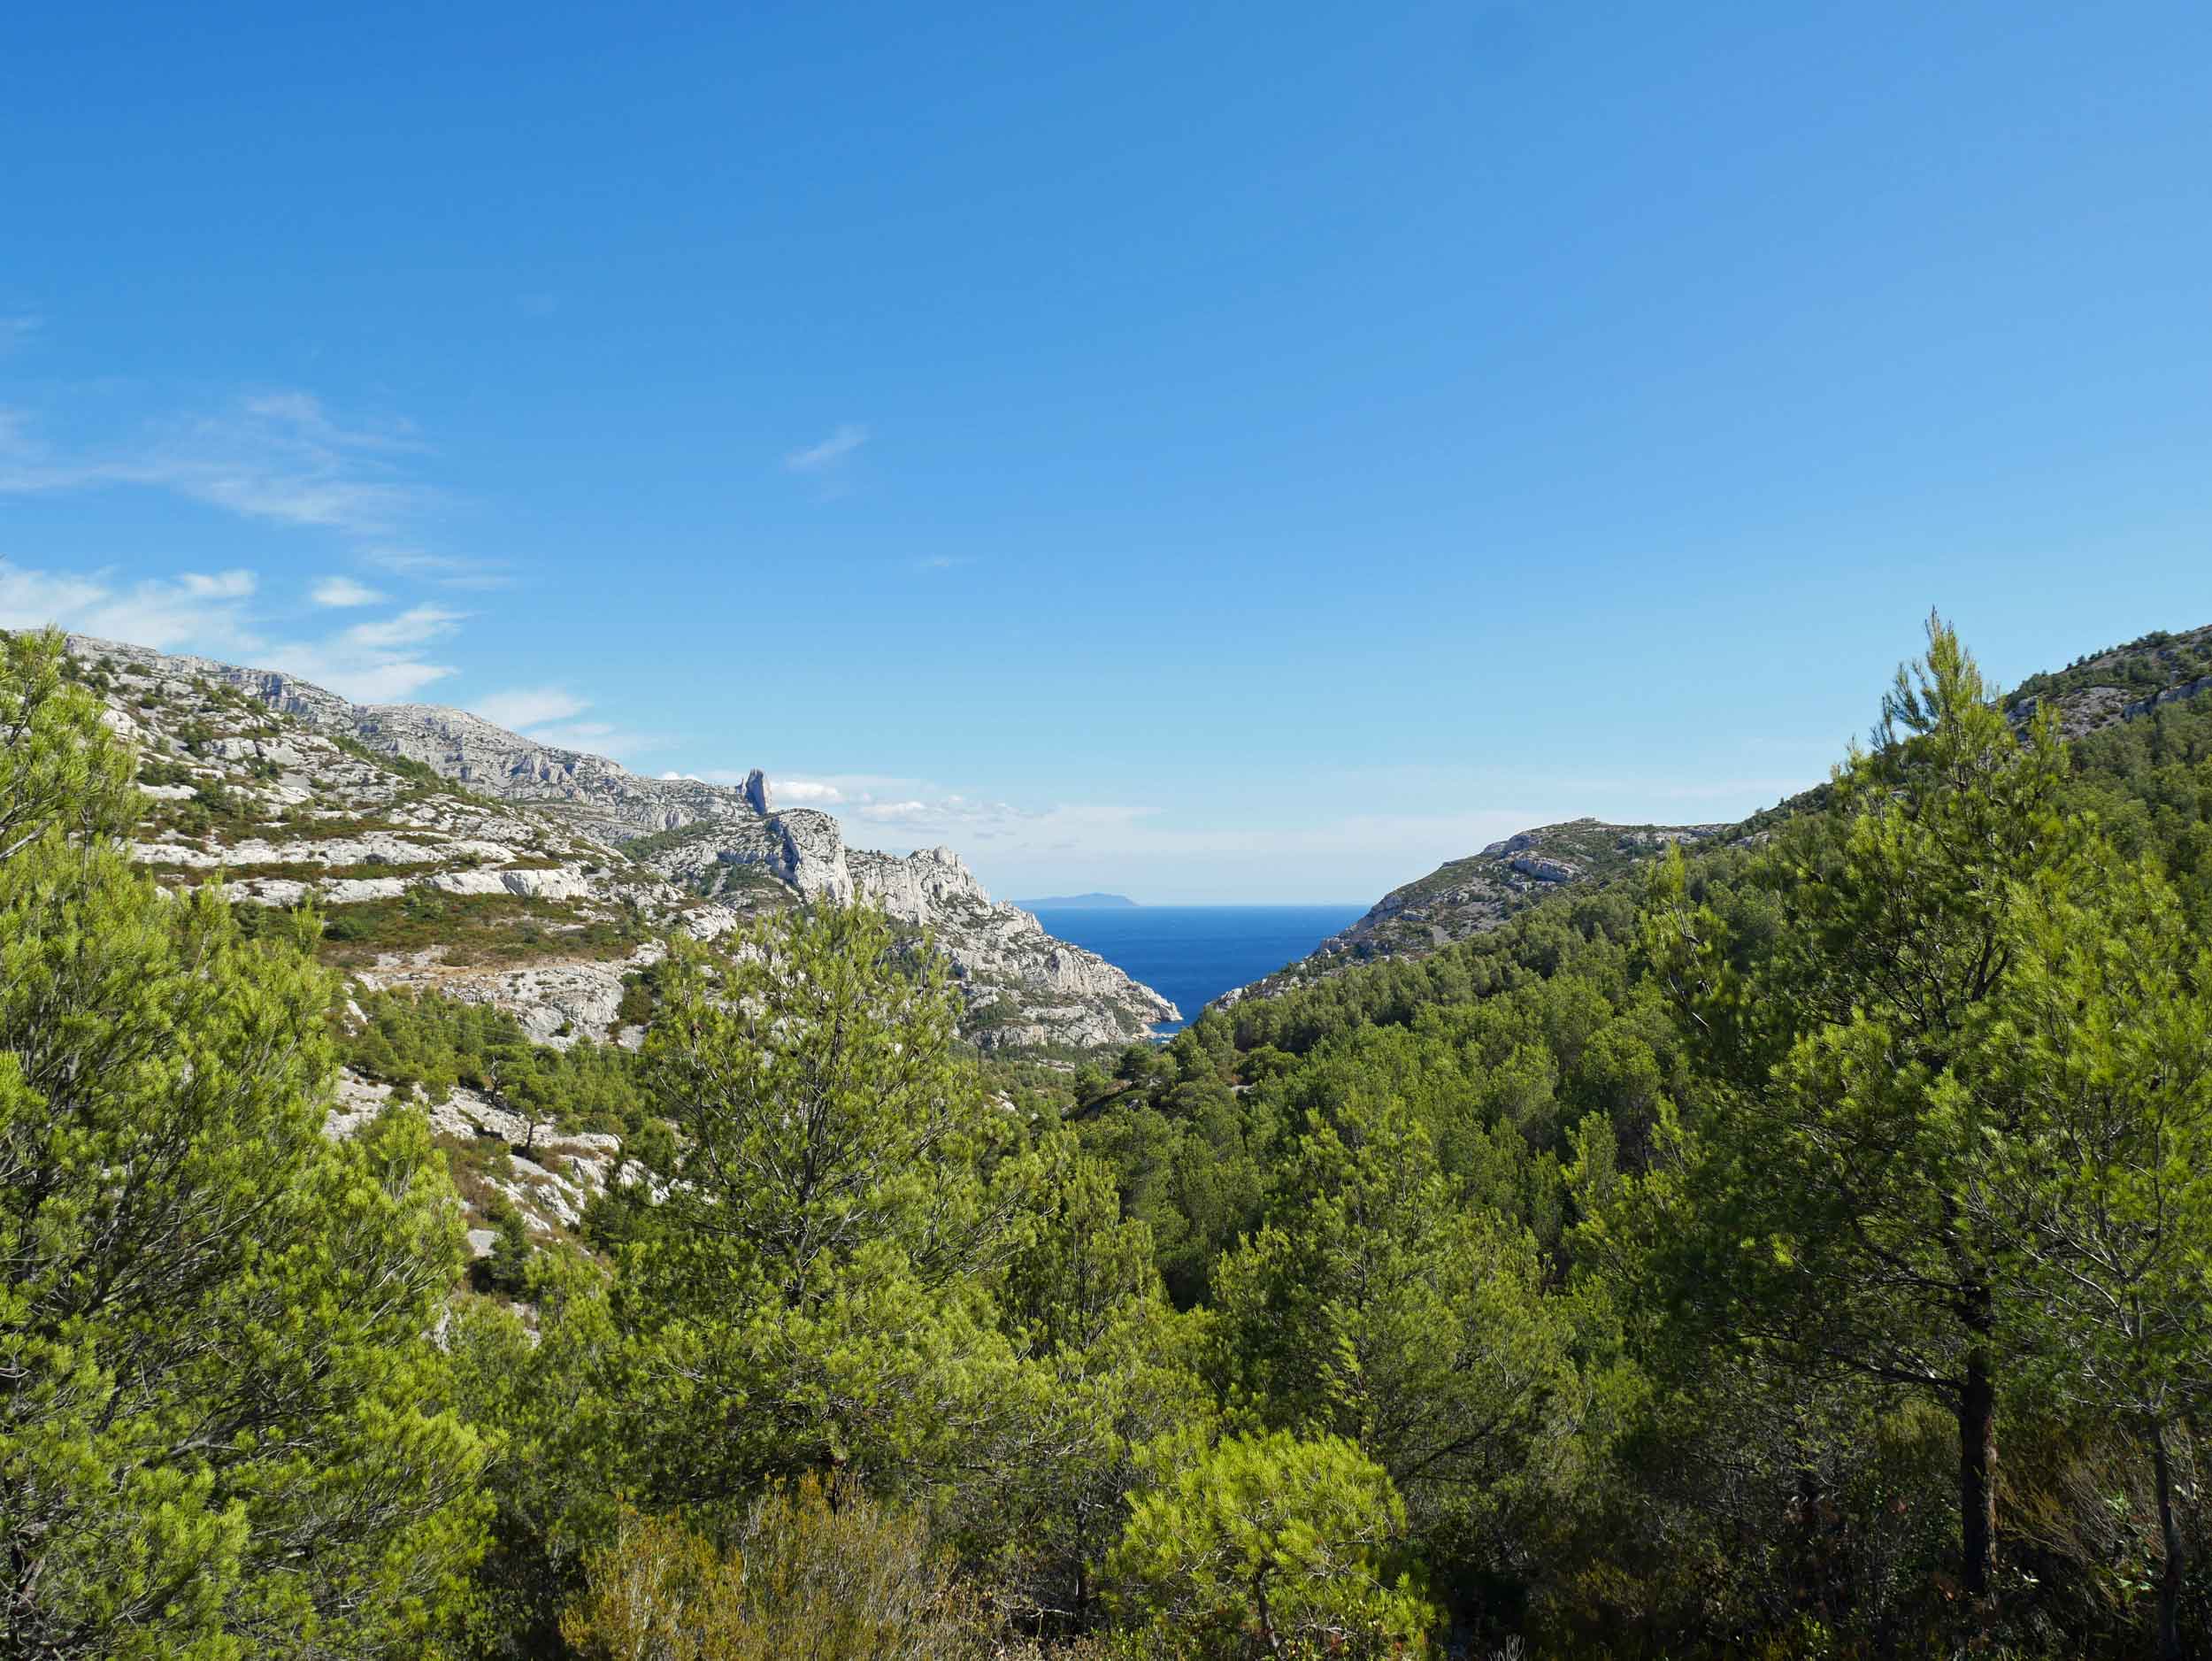  The Calanques National Park, established in 2012, is one of the newest parklands in France (Sept 10). 